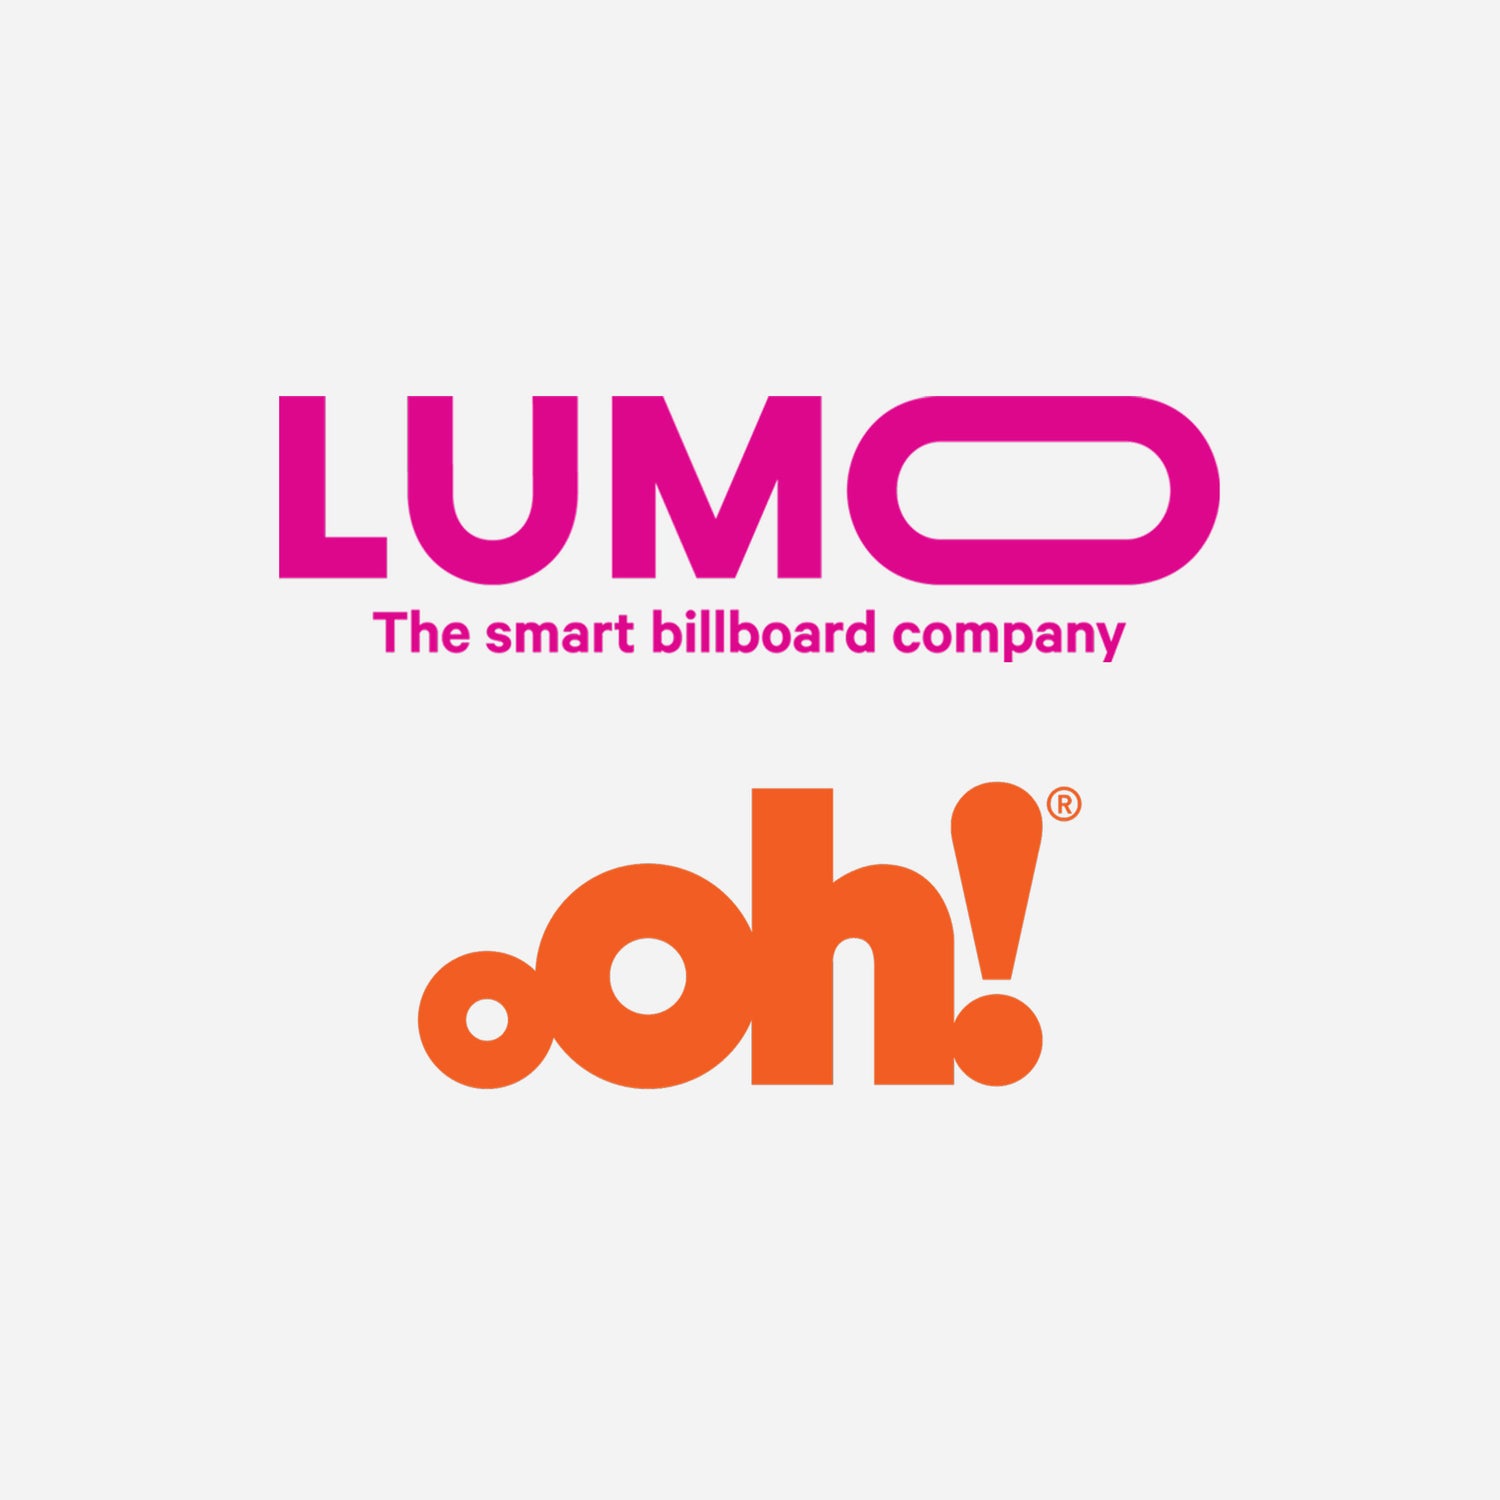 Voices of Hope partner with LUMO & Ooh! Media